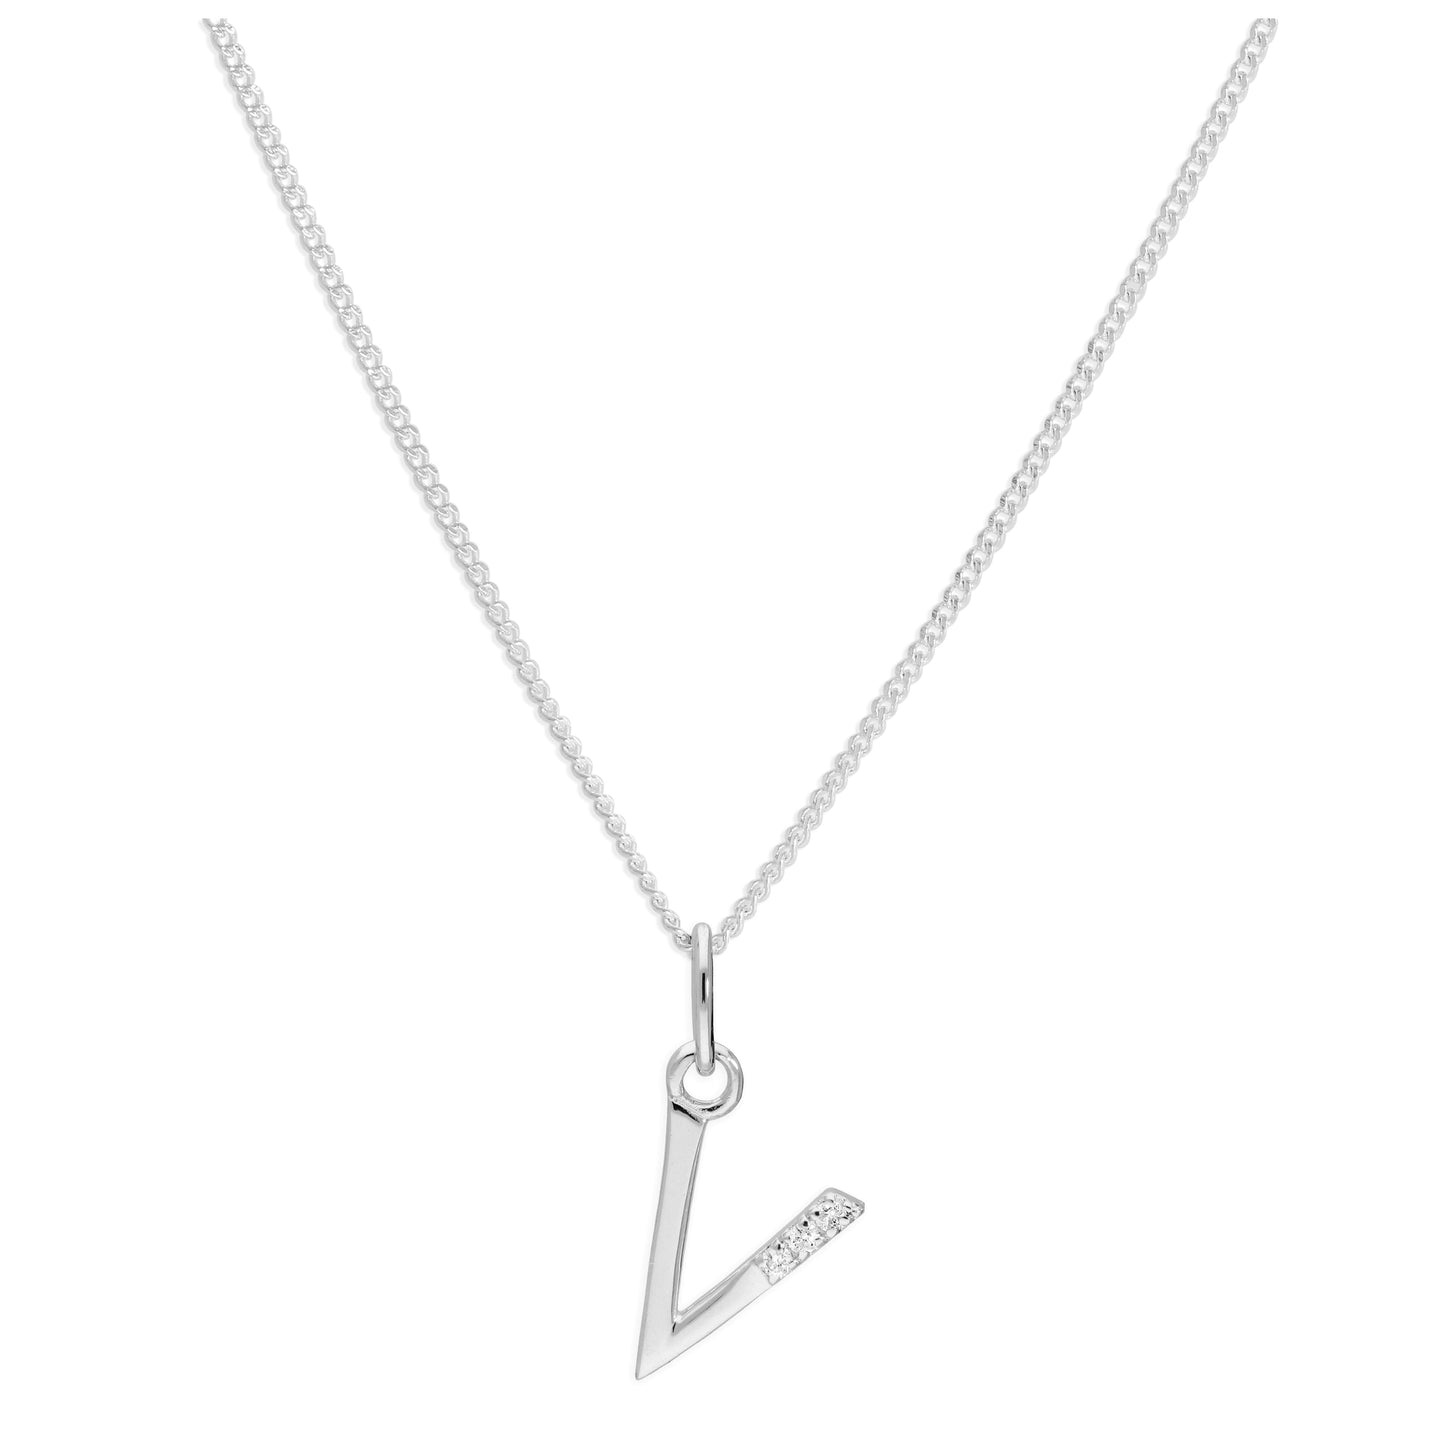 Sterling Silver 3 Stone Geniune Diamond 0.012ct Letter V Necklace Pendant 14 - 32 Inches